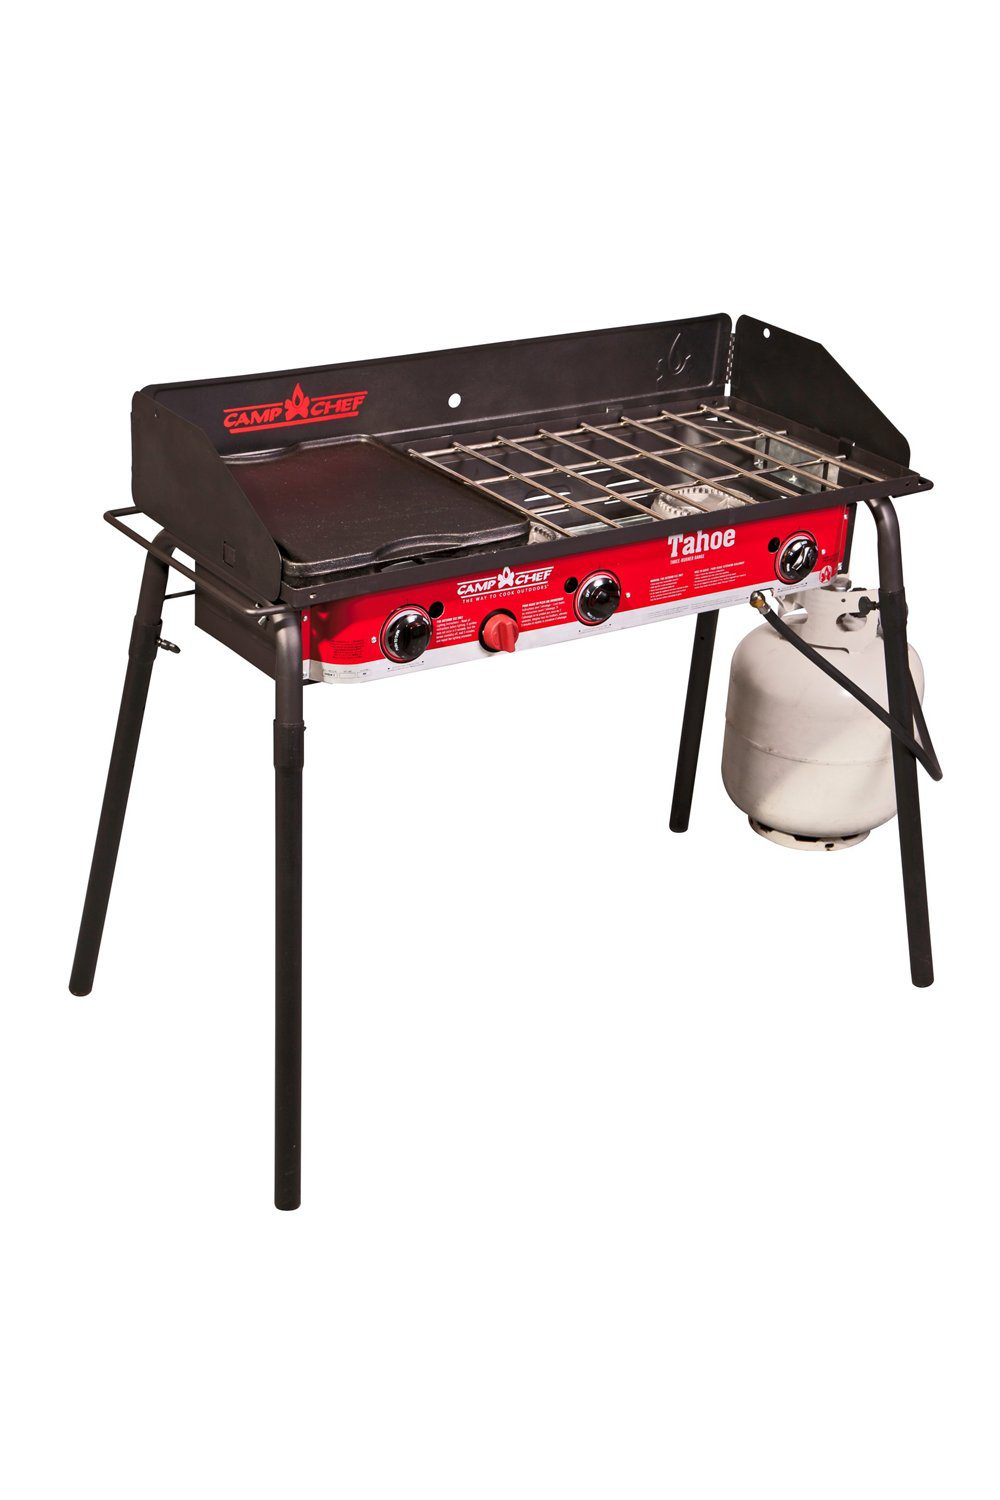 New Camp Chef Tahoe 3 Burner Stove for Living room